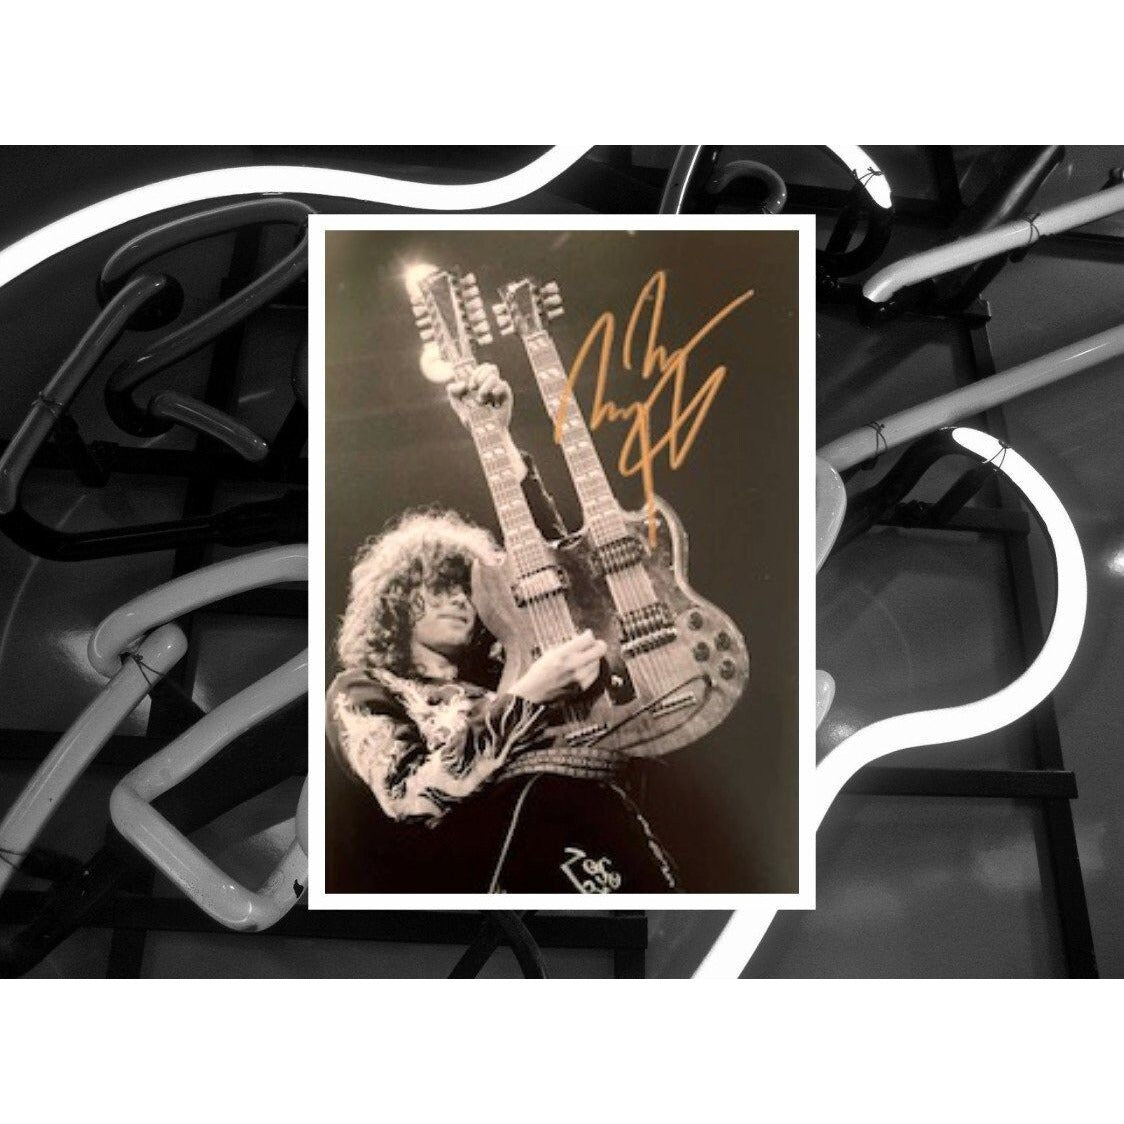 Jimmy Page Led Zeppelin 5 x 7 photo signed with proof